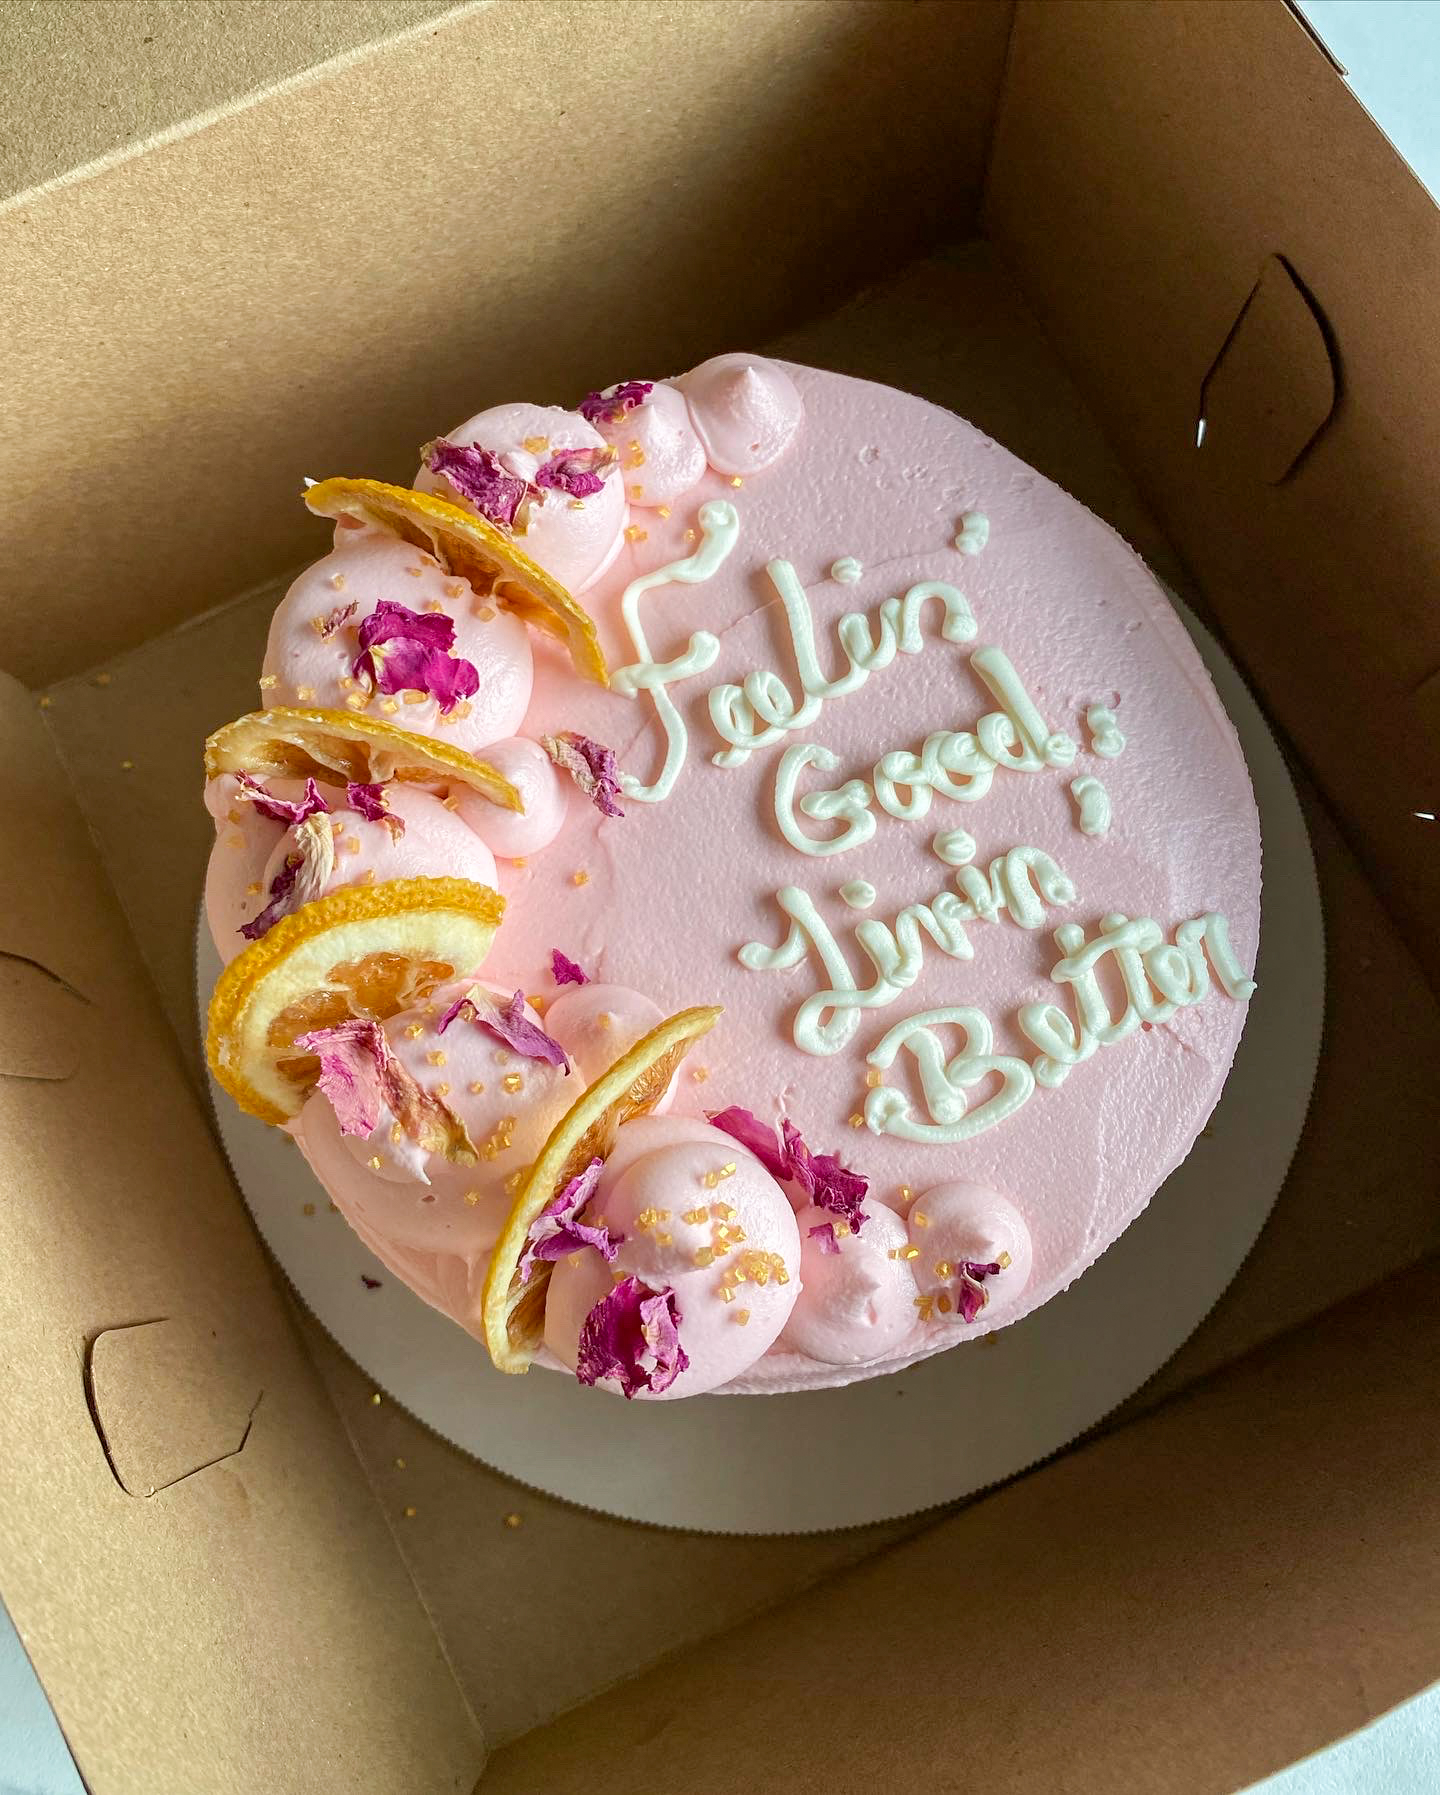 Lemon cake with rose icing from Valhalla Bakery - connected to Freya's Diner